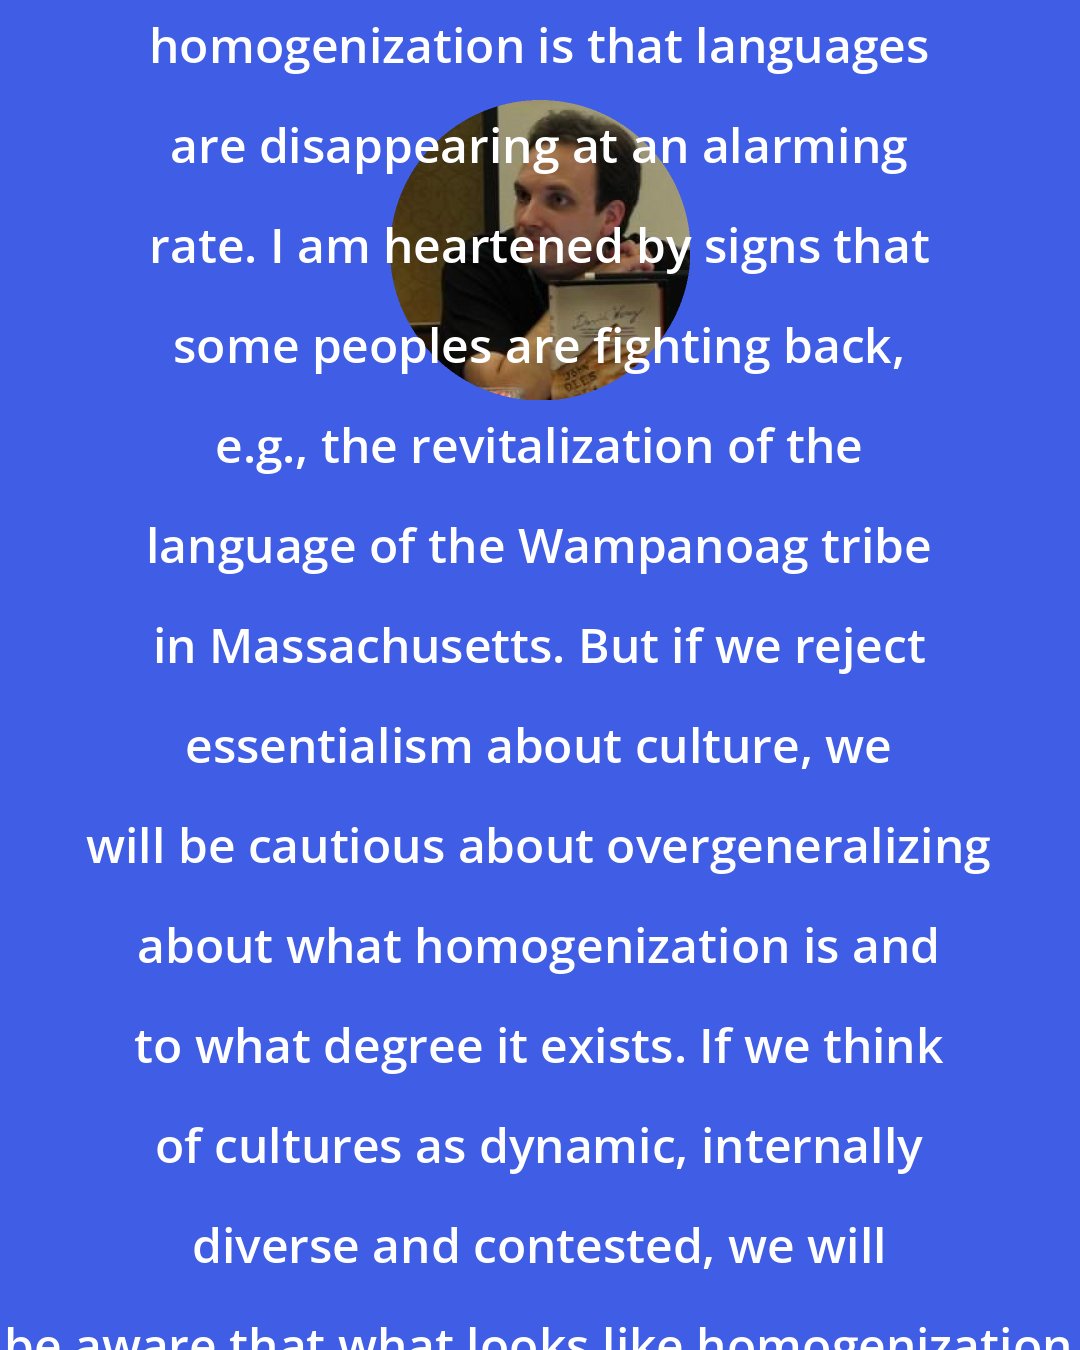 David Wong: Both sameness and difference are issues for us. A sign of cultural homogenization is that languages are disappearing at an alarming rate. I am heartened by signs that some peoples are fighting back, e.g., the revitalization of the language of the Wampanoag tribe in Massachusetts. But if we reject essentialism about culture, we will be cautious about overgeneralizing about what homogenization is and to what degree it exists. If we think of cultures as dynamic, internally diverse and contested, we will be aware that what looks like homogenization may be deeper down this more complicated thing.